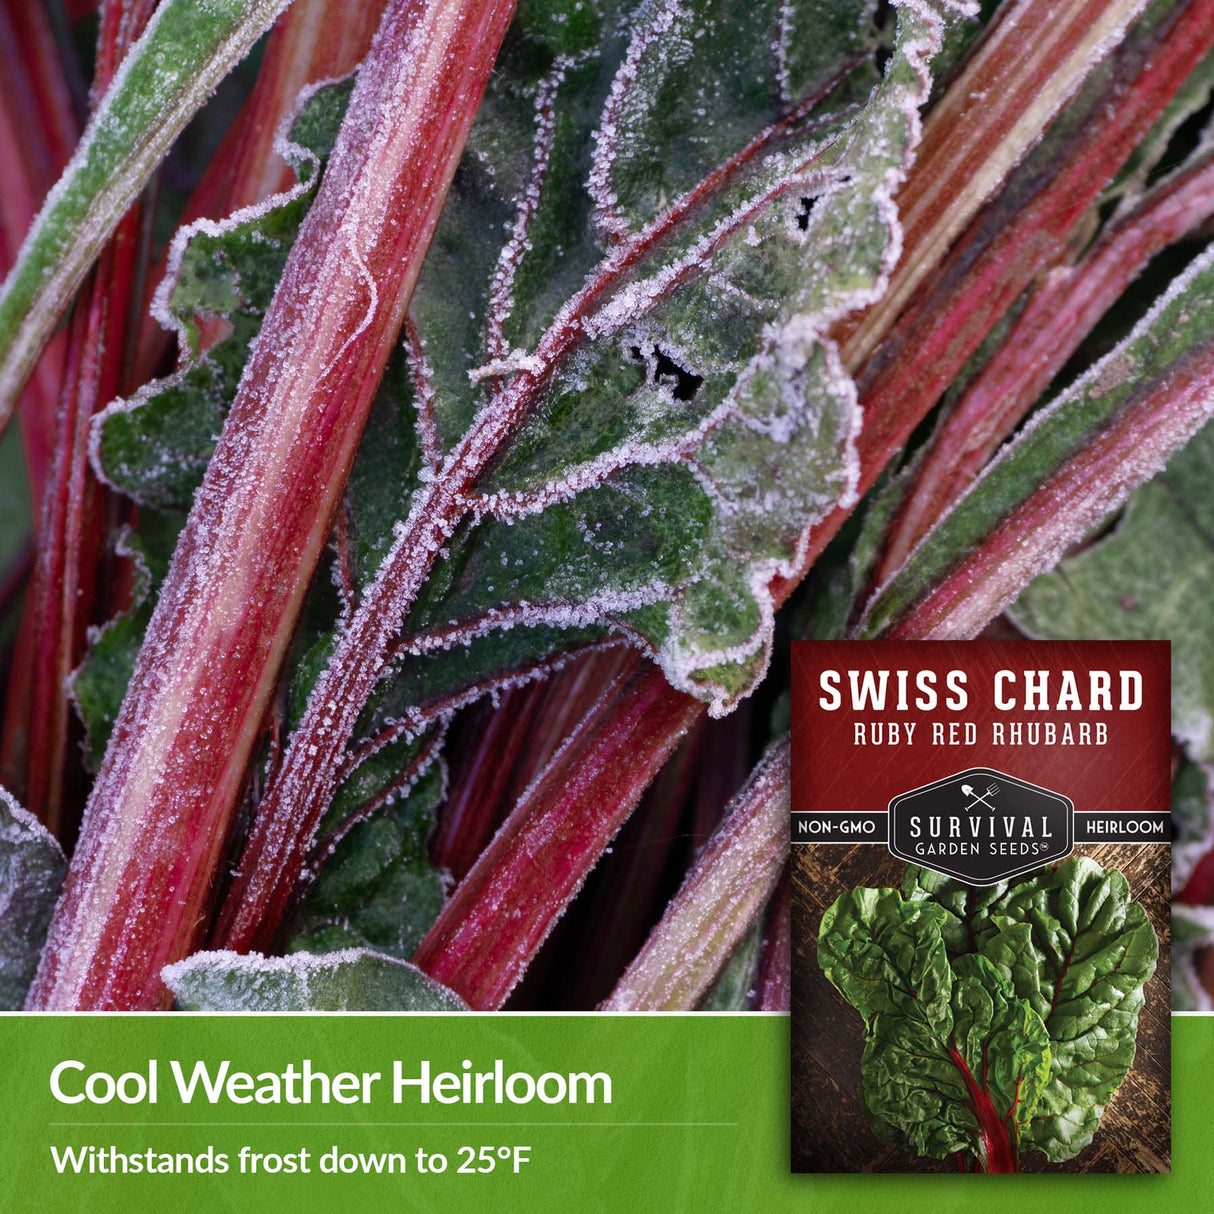 Ruby Red Rhubarb Swiss Chard is a cool weather heirloom